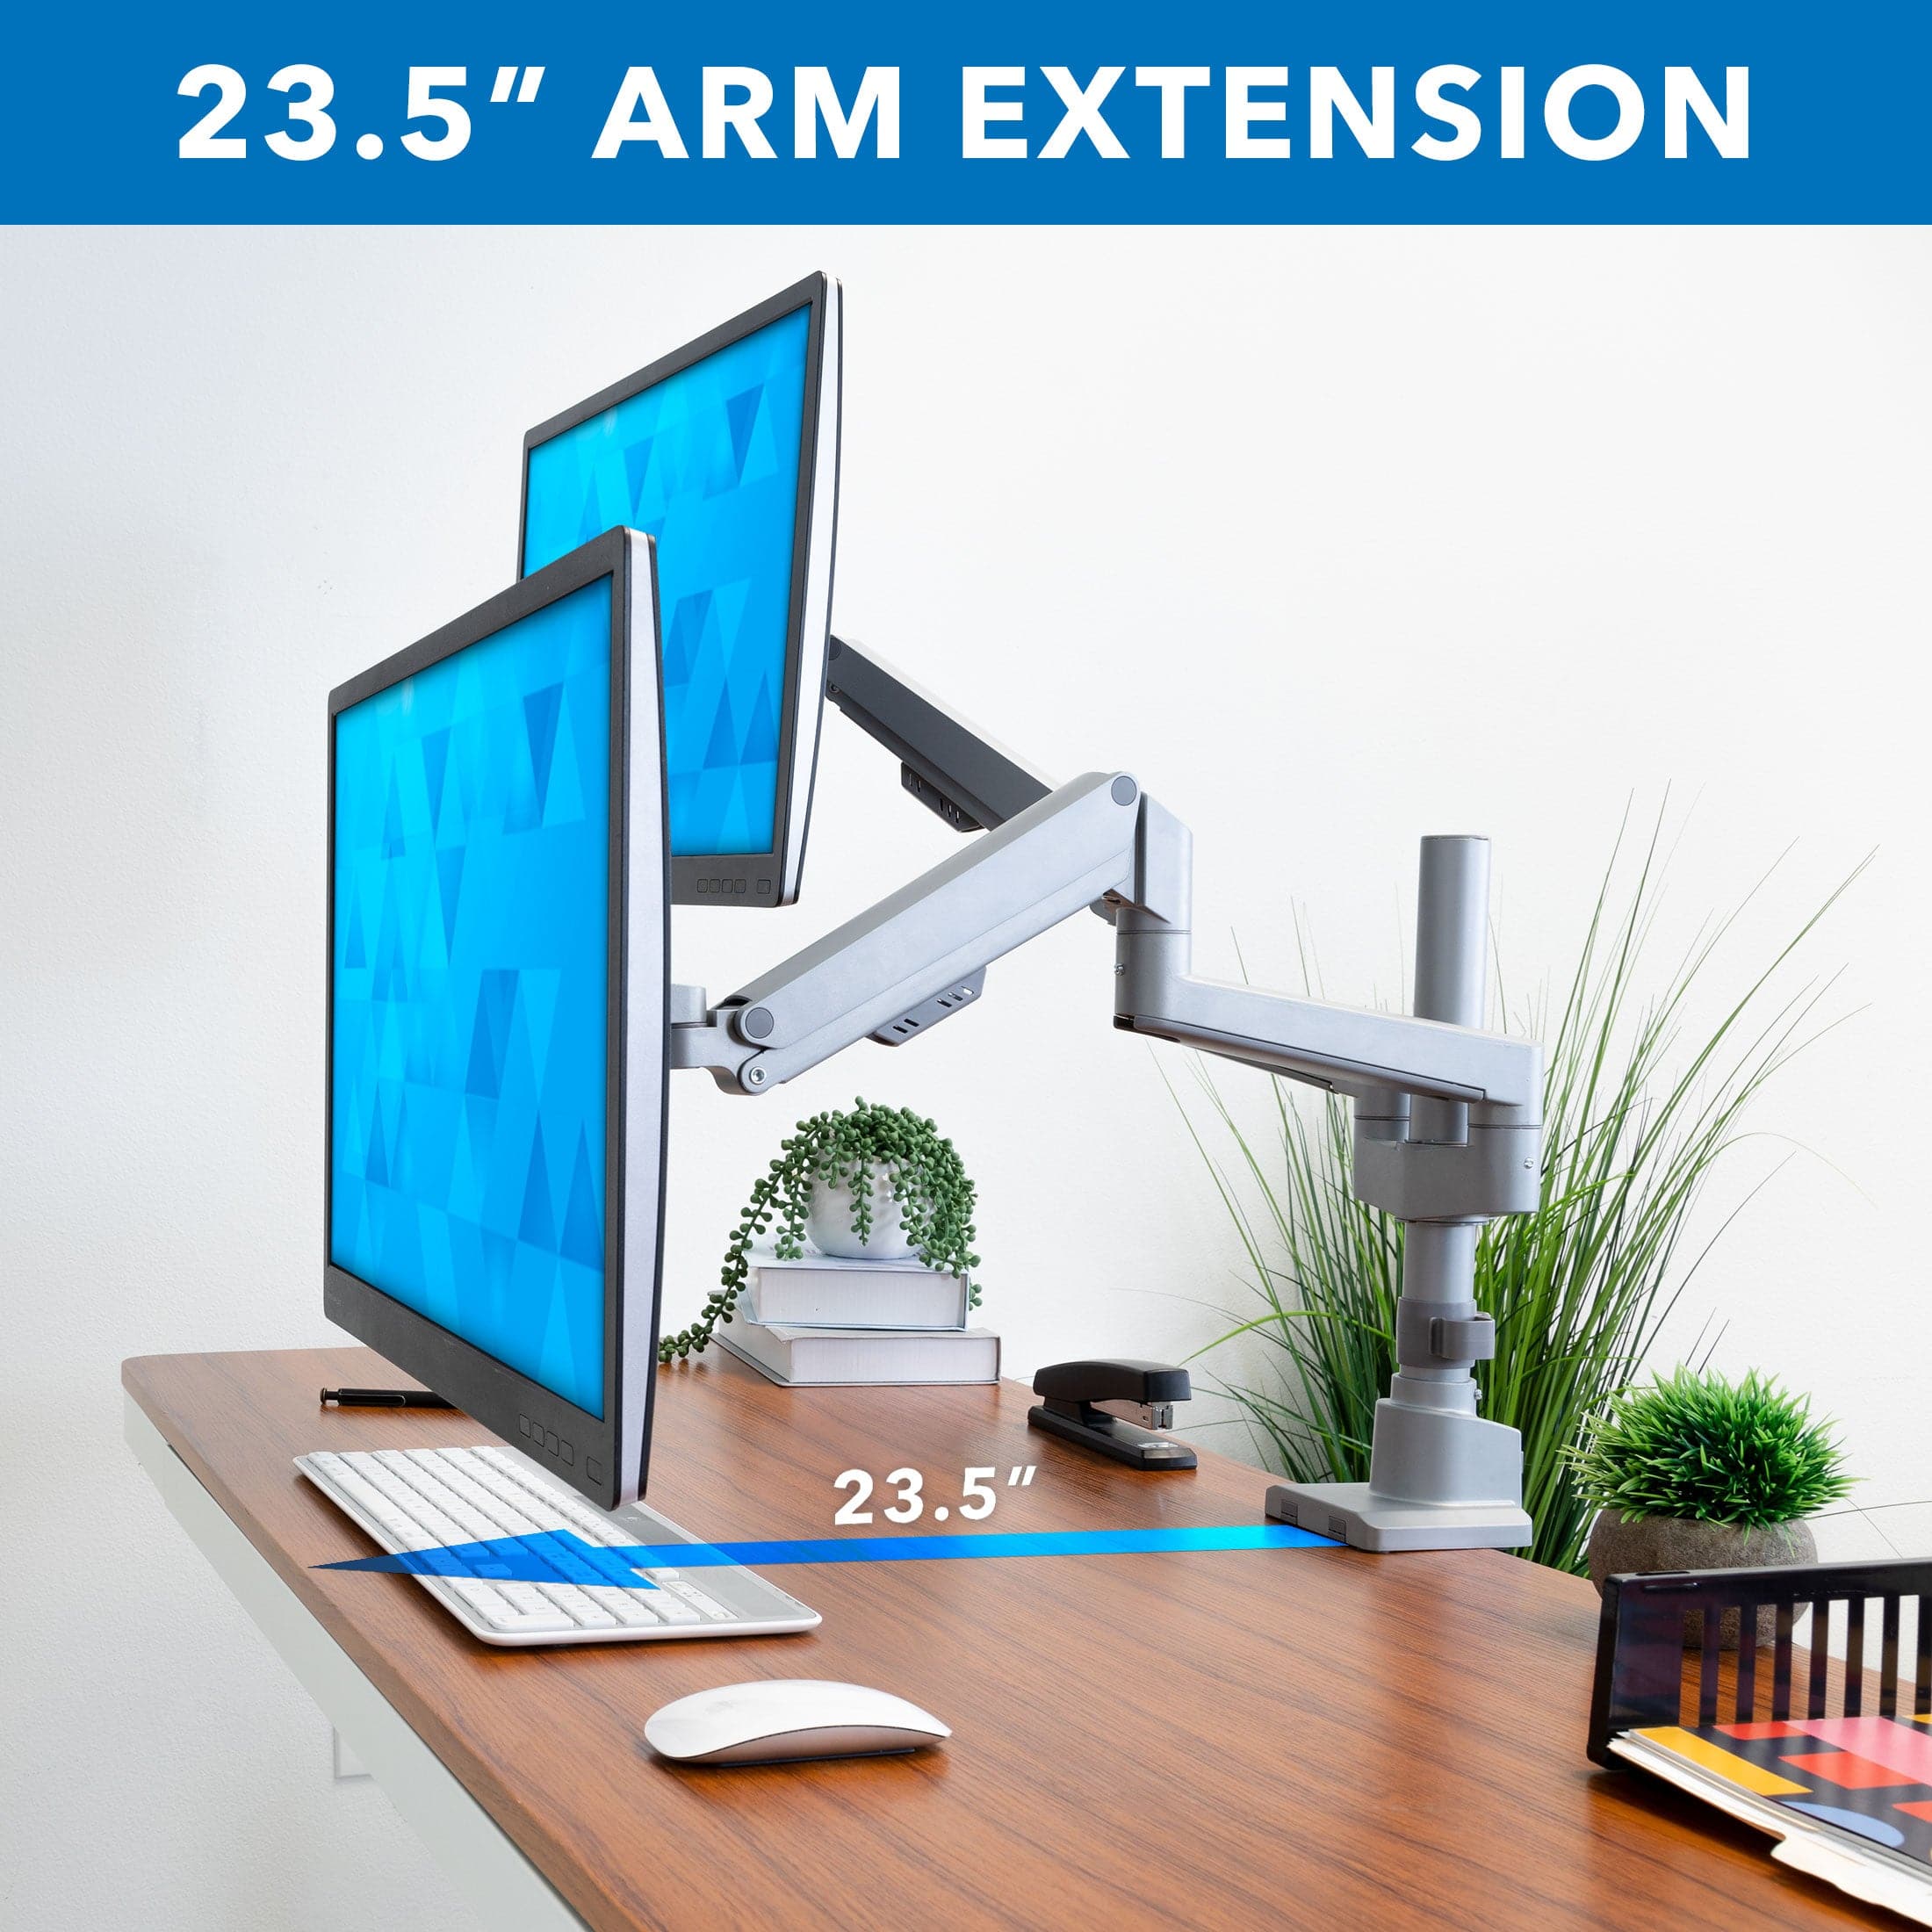 Full Motion Dual Monitor Desk Mount, Height Adjustable with Gas Spring Arms